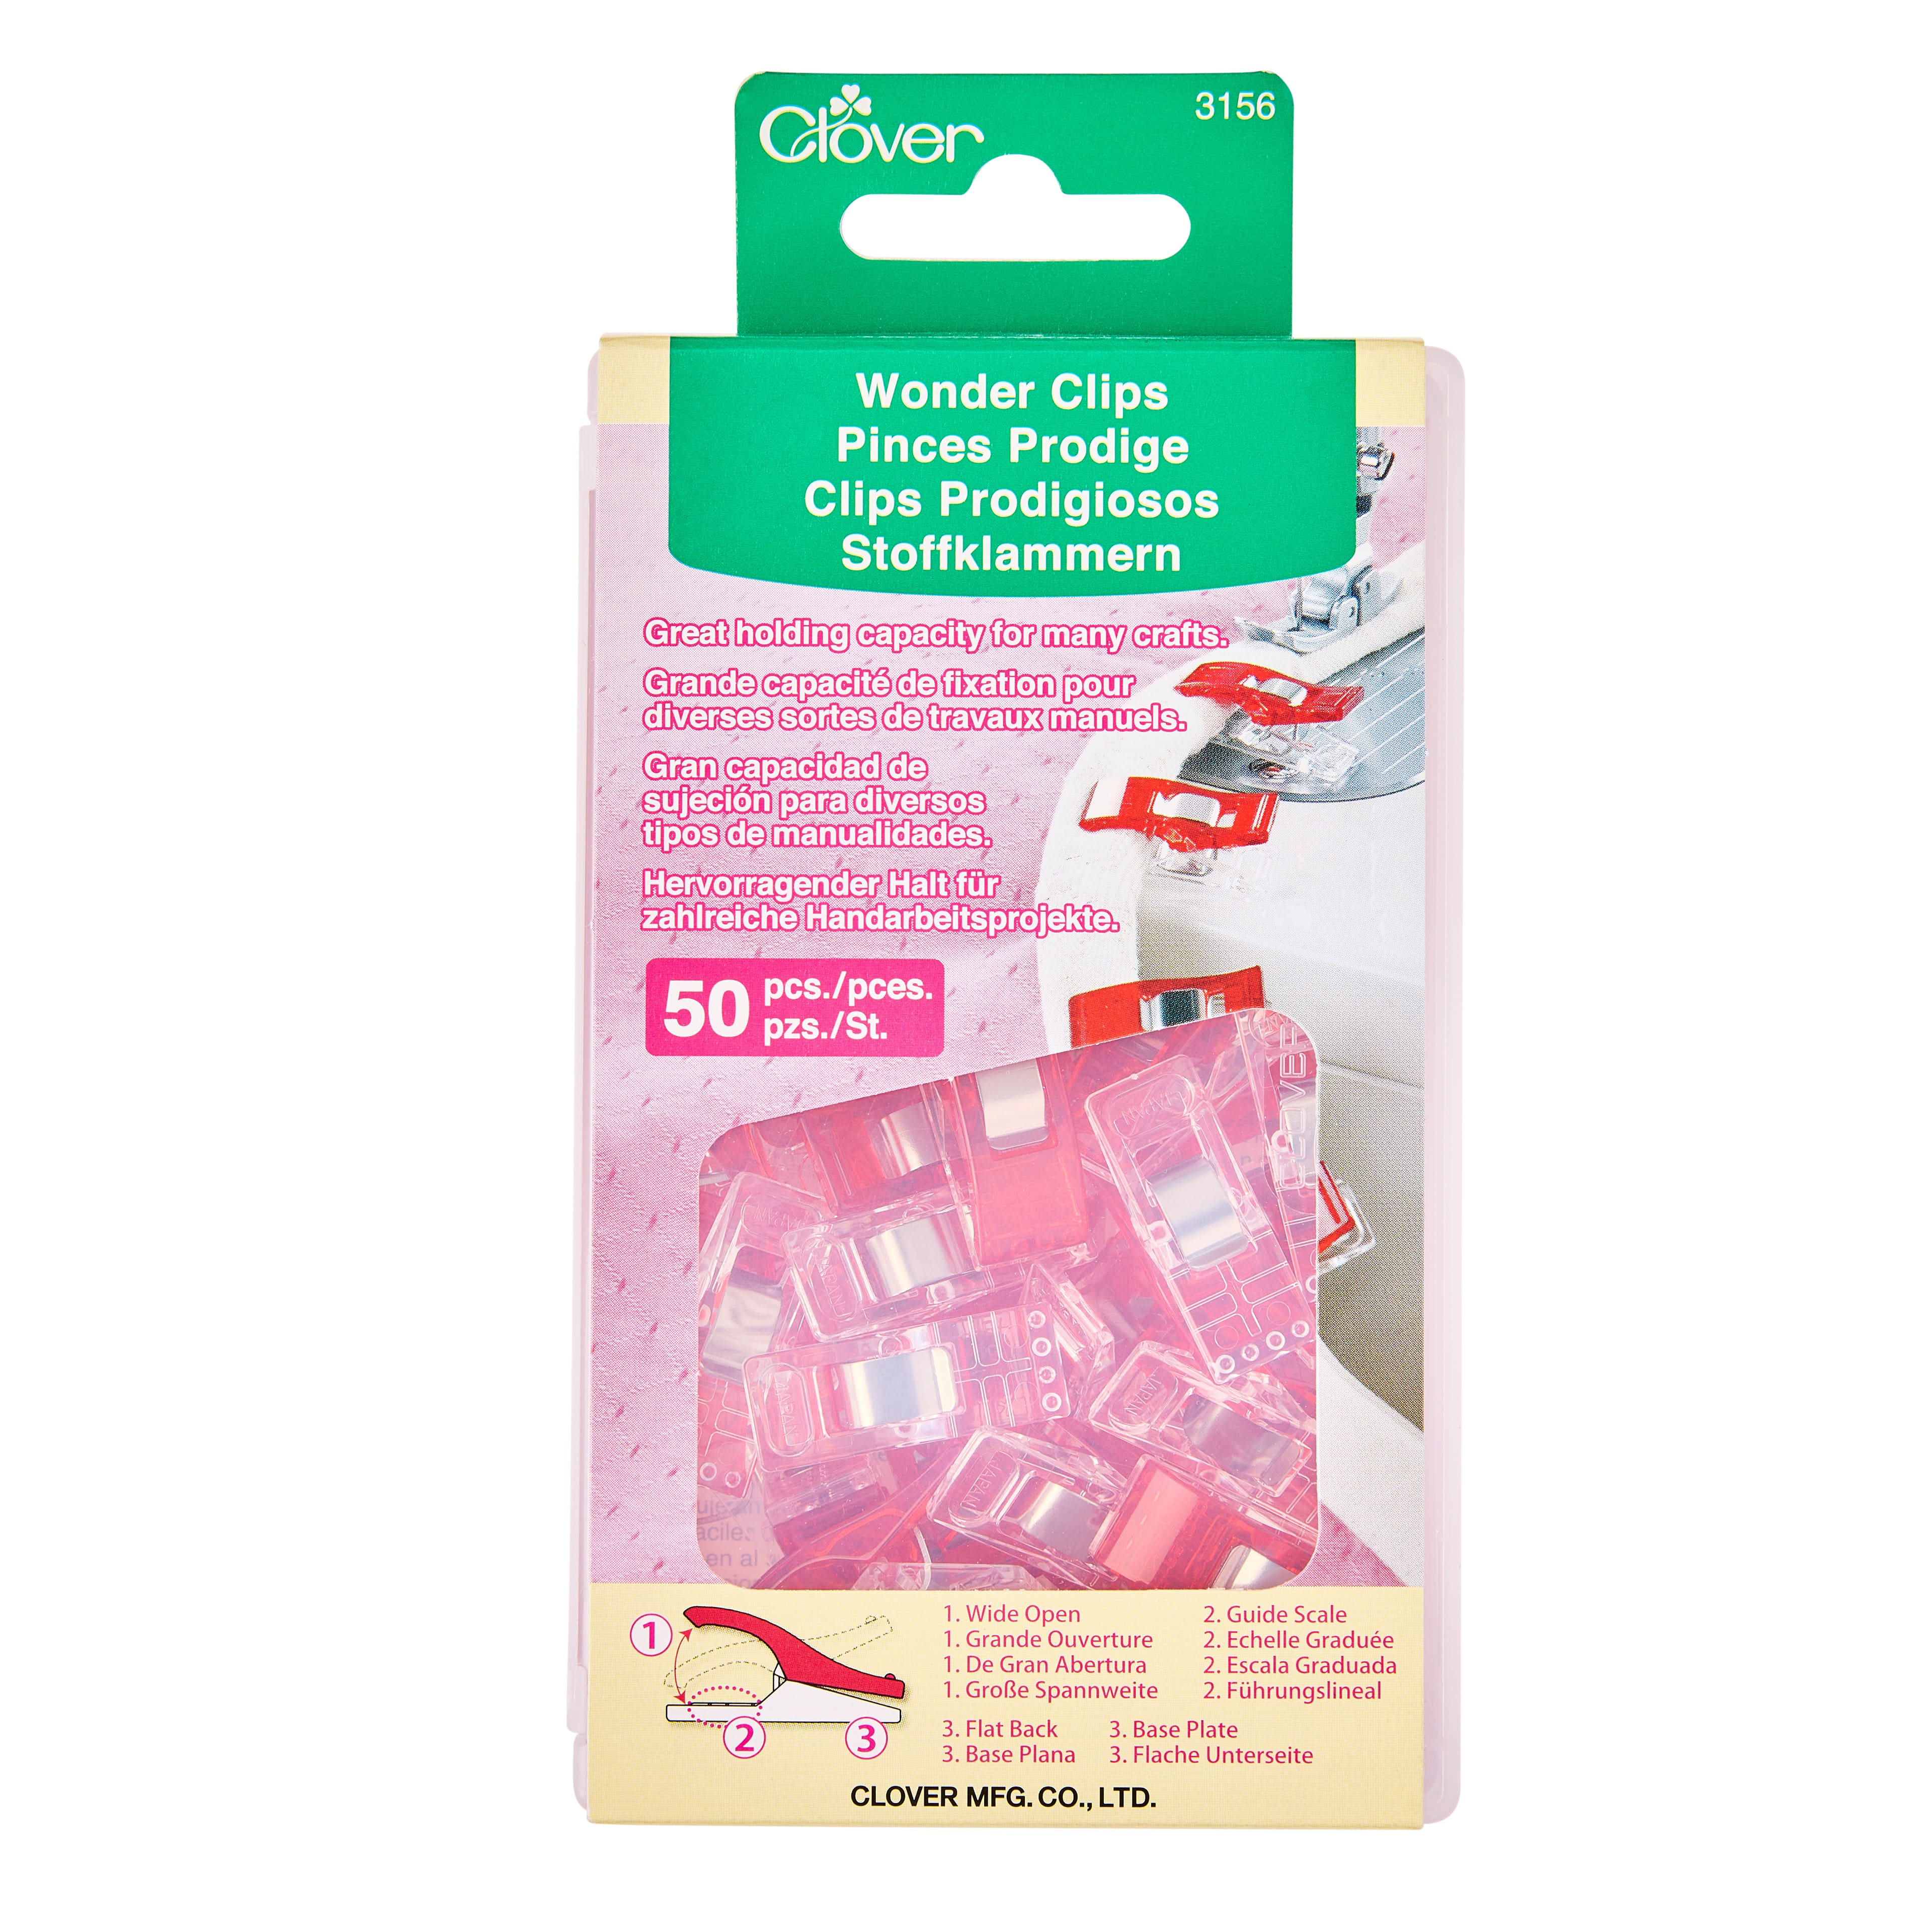 Clover Wonder Clips (3156) 50 Pieces BRAND NEW IN BOX & SEALED